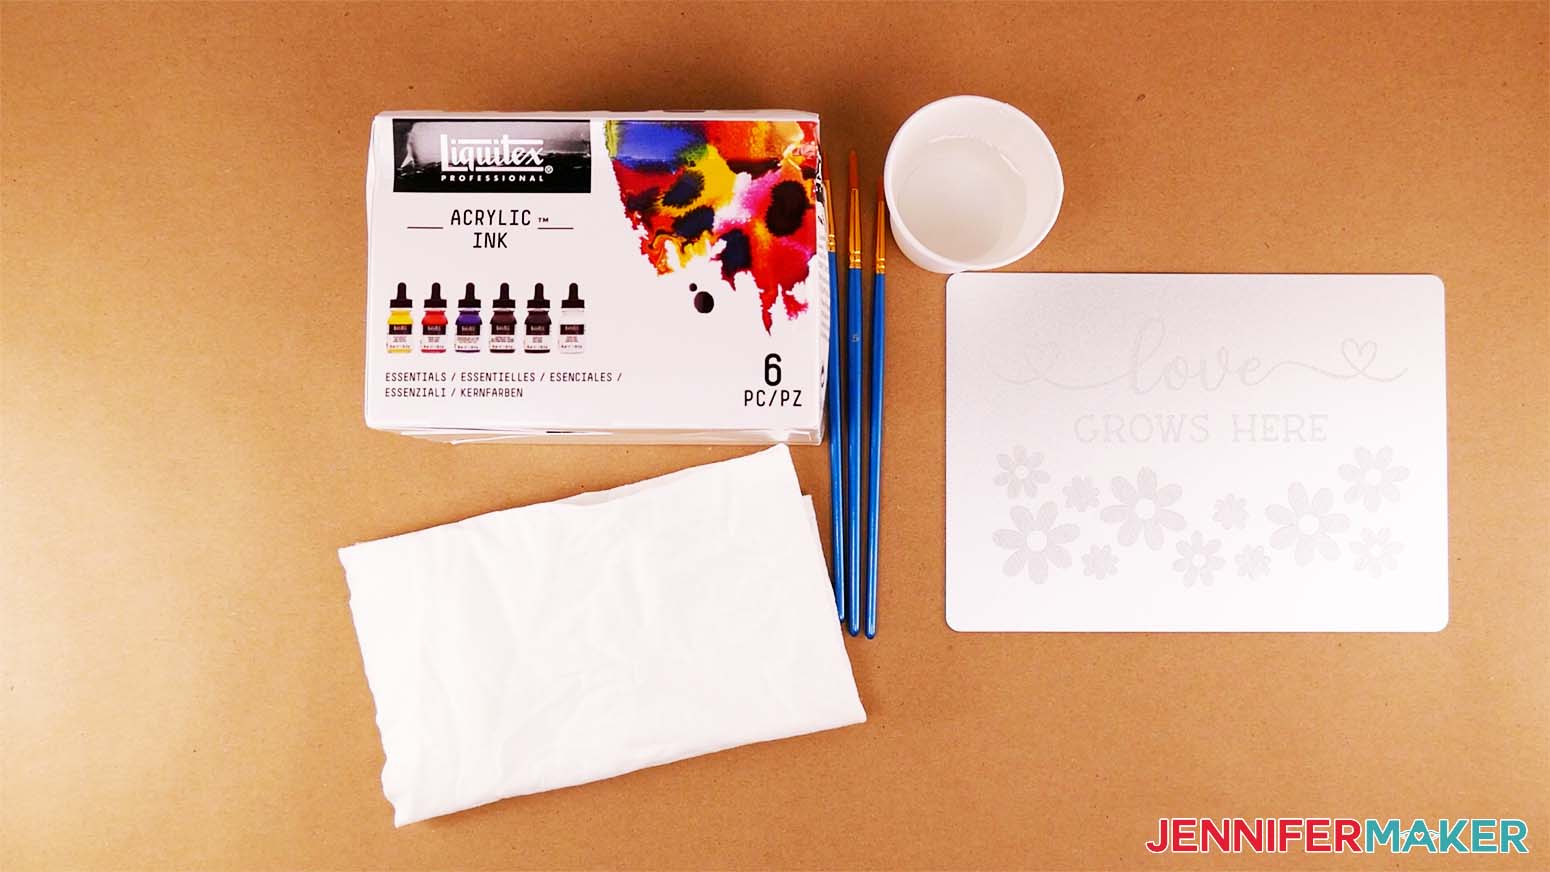 The supplies needed for coloring your engraved plaque with acrylic inks include the inks, brushes, paper towels, a soft cloth, and a cup of water